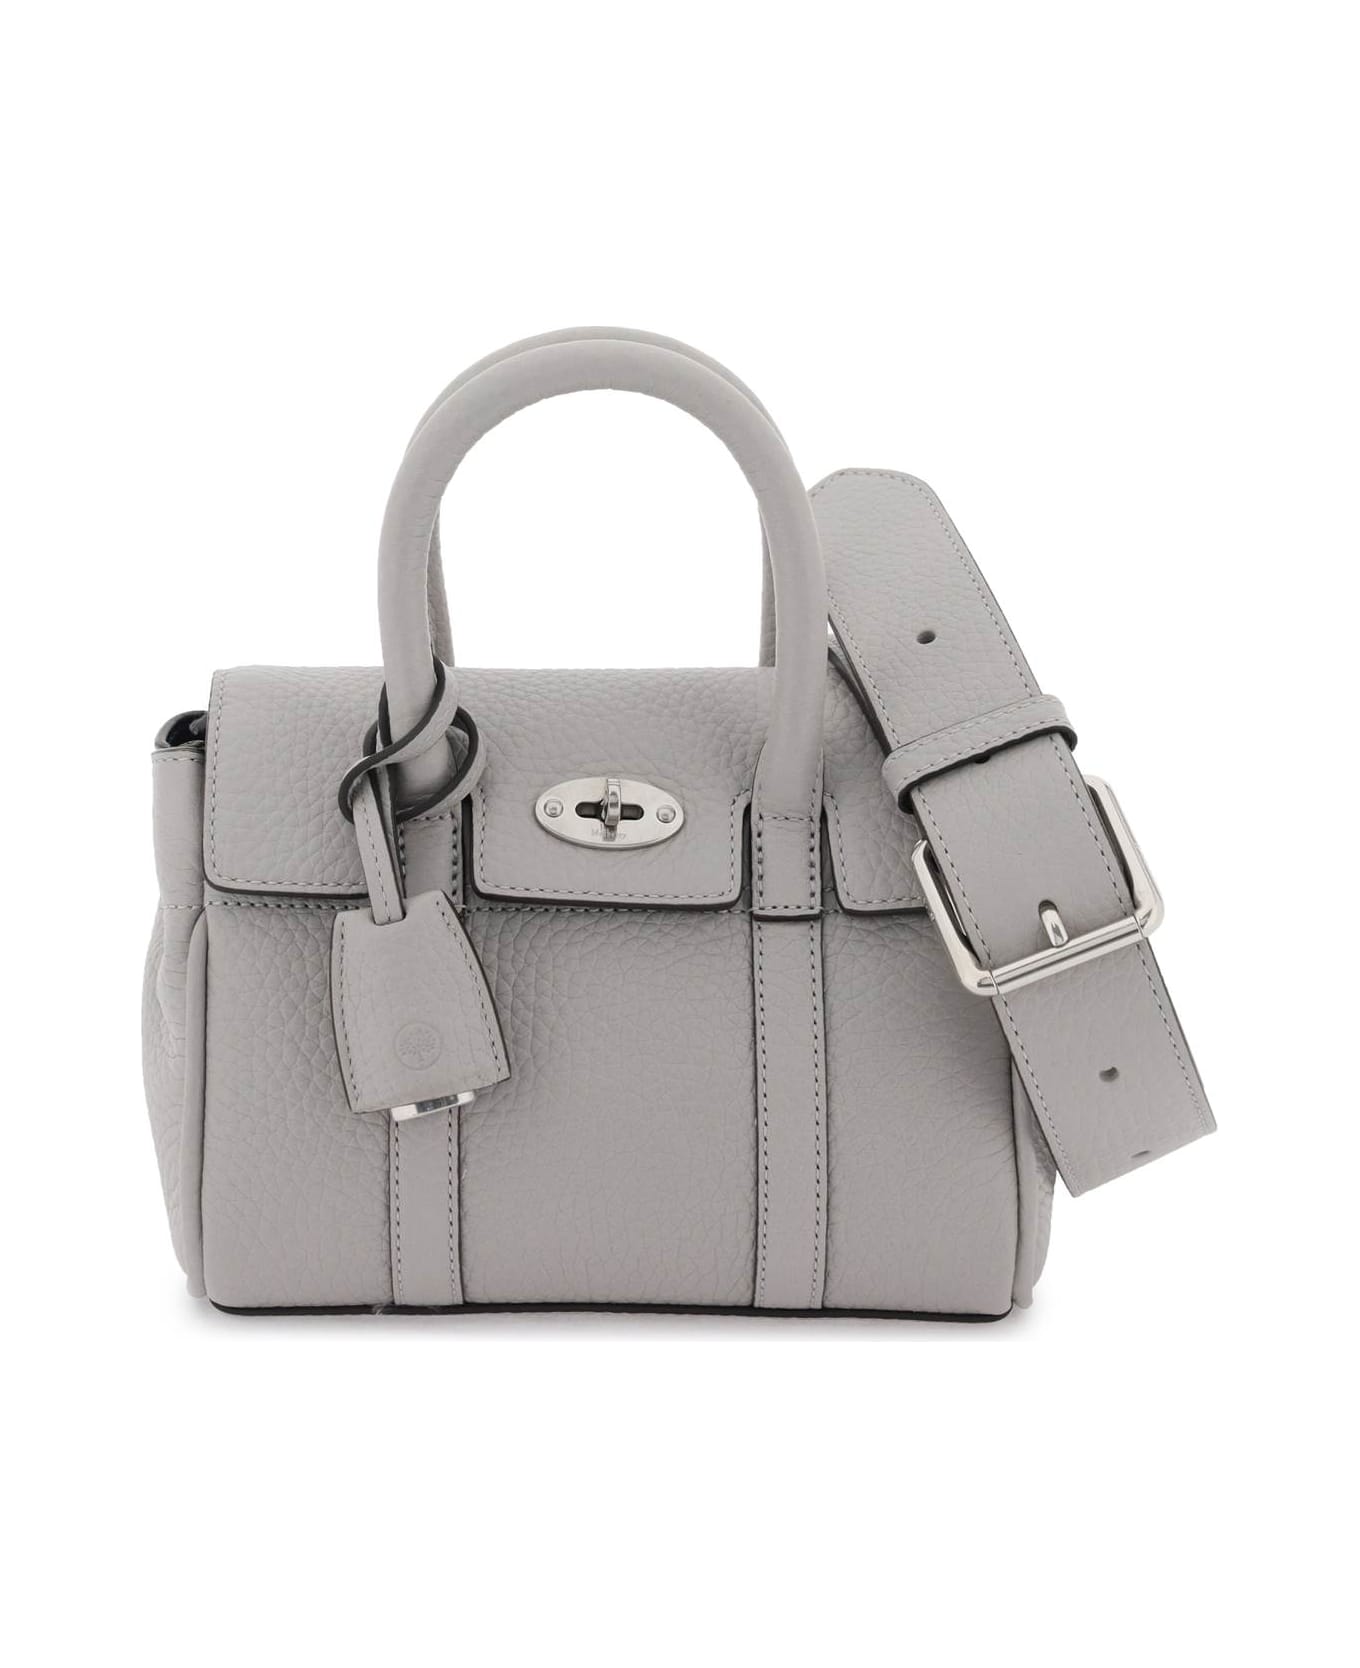 Mulberry Bayswater Mini Bag - PALE GREY (Grey) トートバッグ